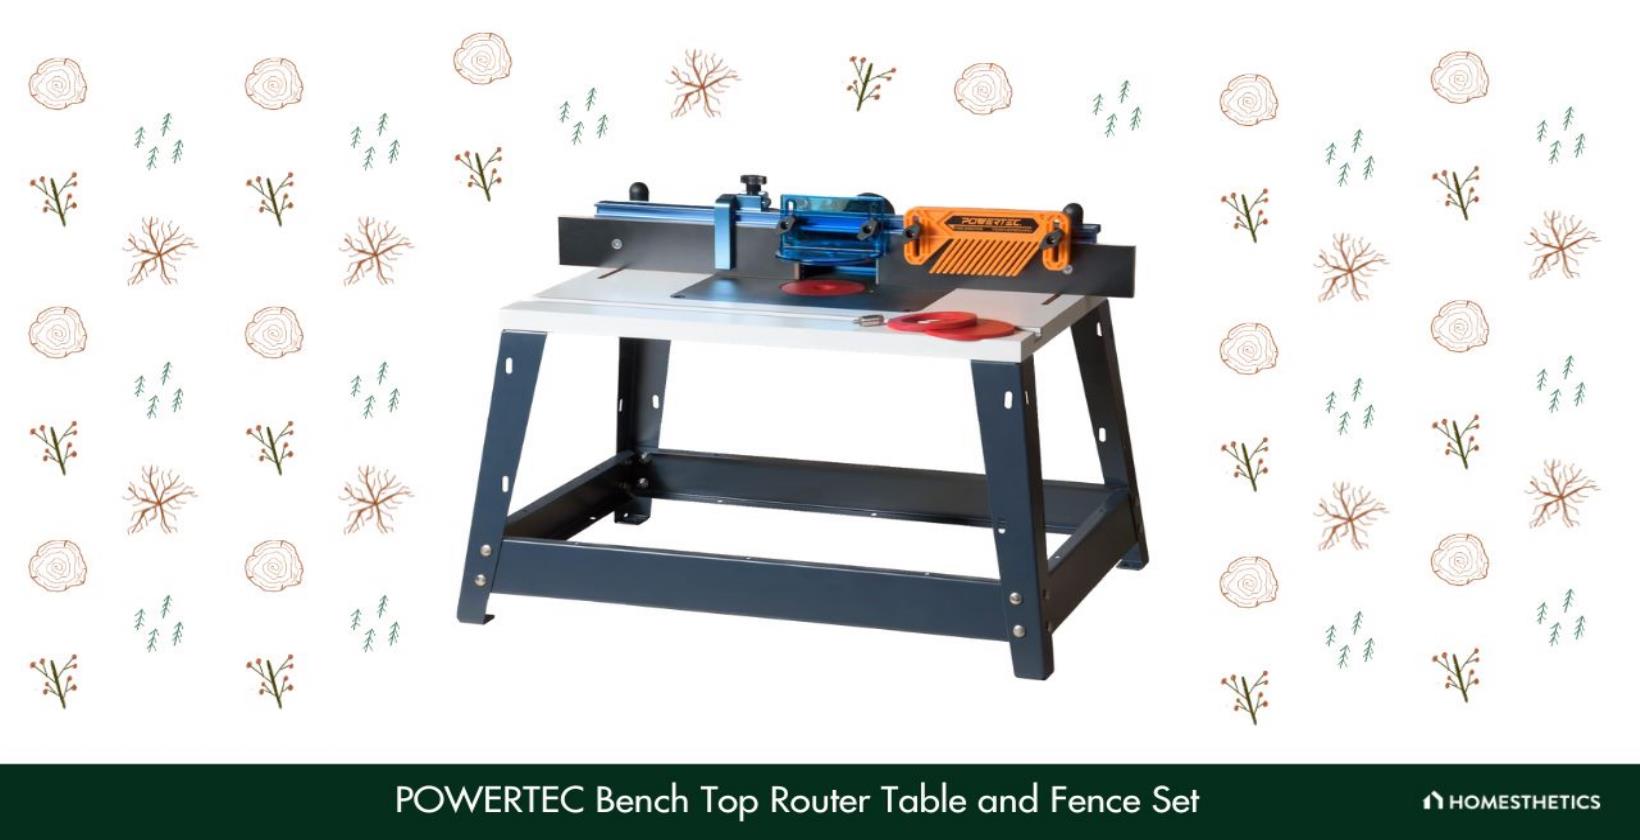 9. POWERTEC Bench Top Router Table and Fence Set